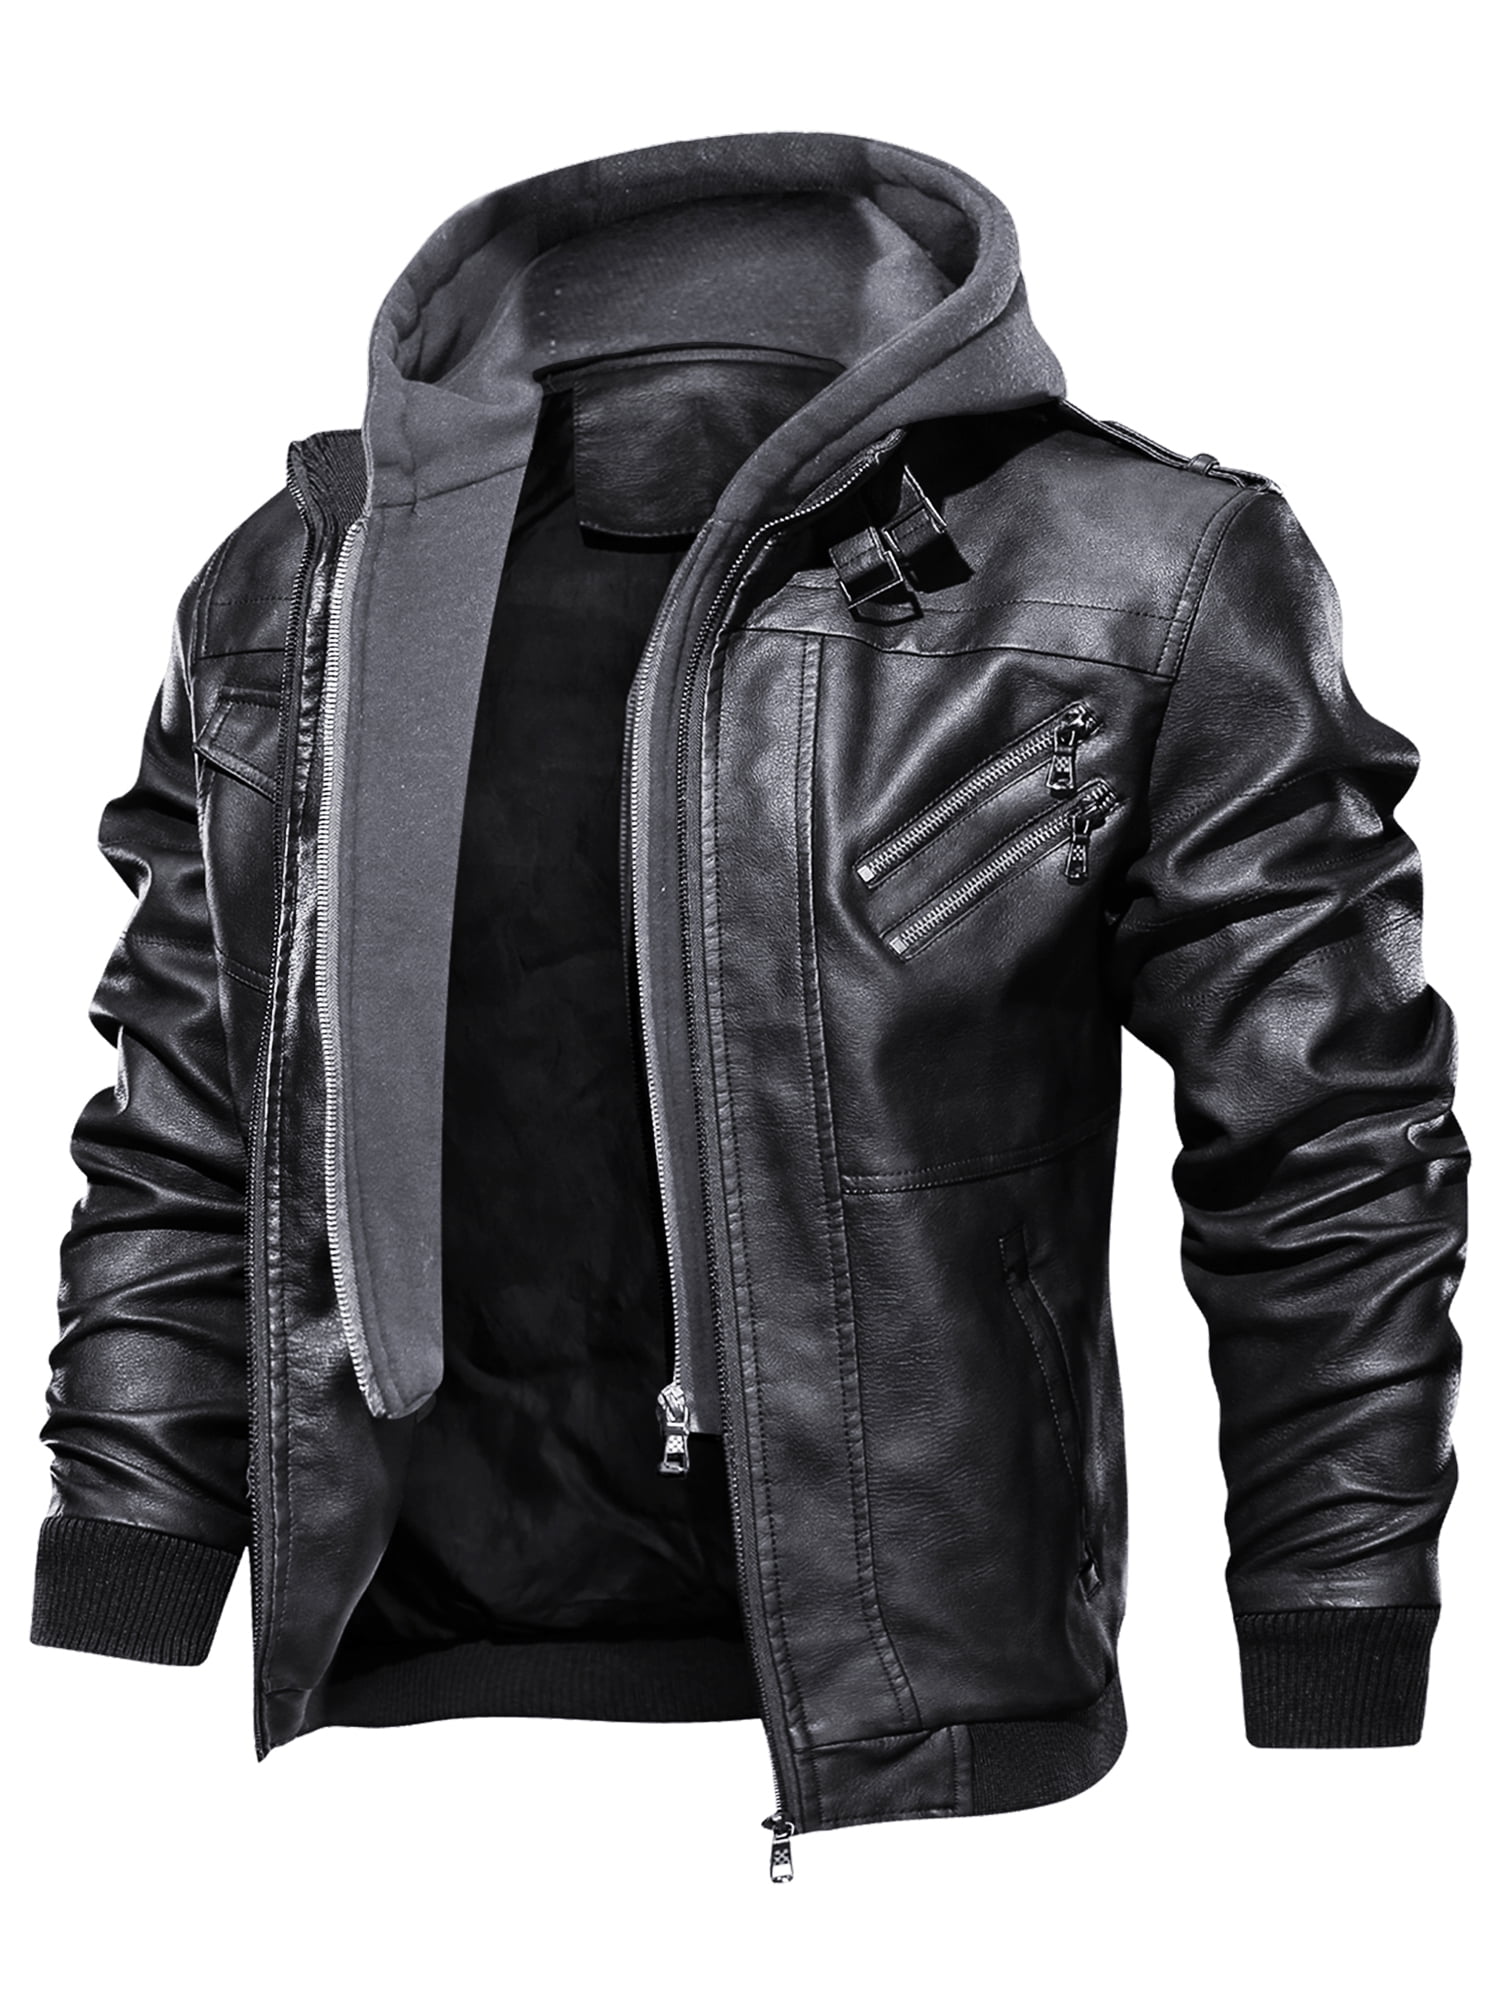 FEDTOSING Men's Faux Leather Jacket Retro Zip-UP Stand Collar ...